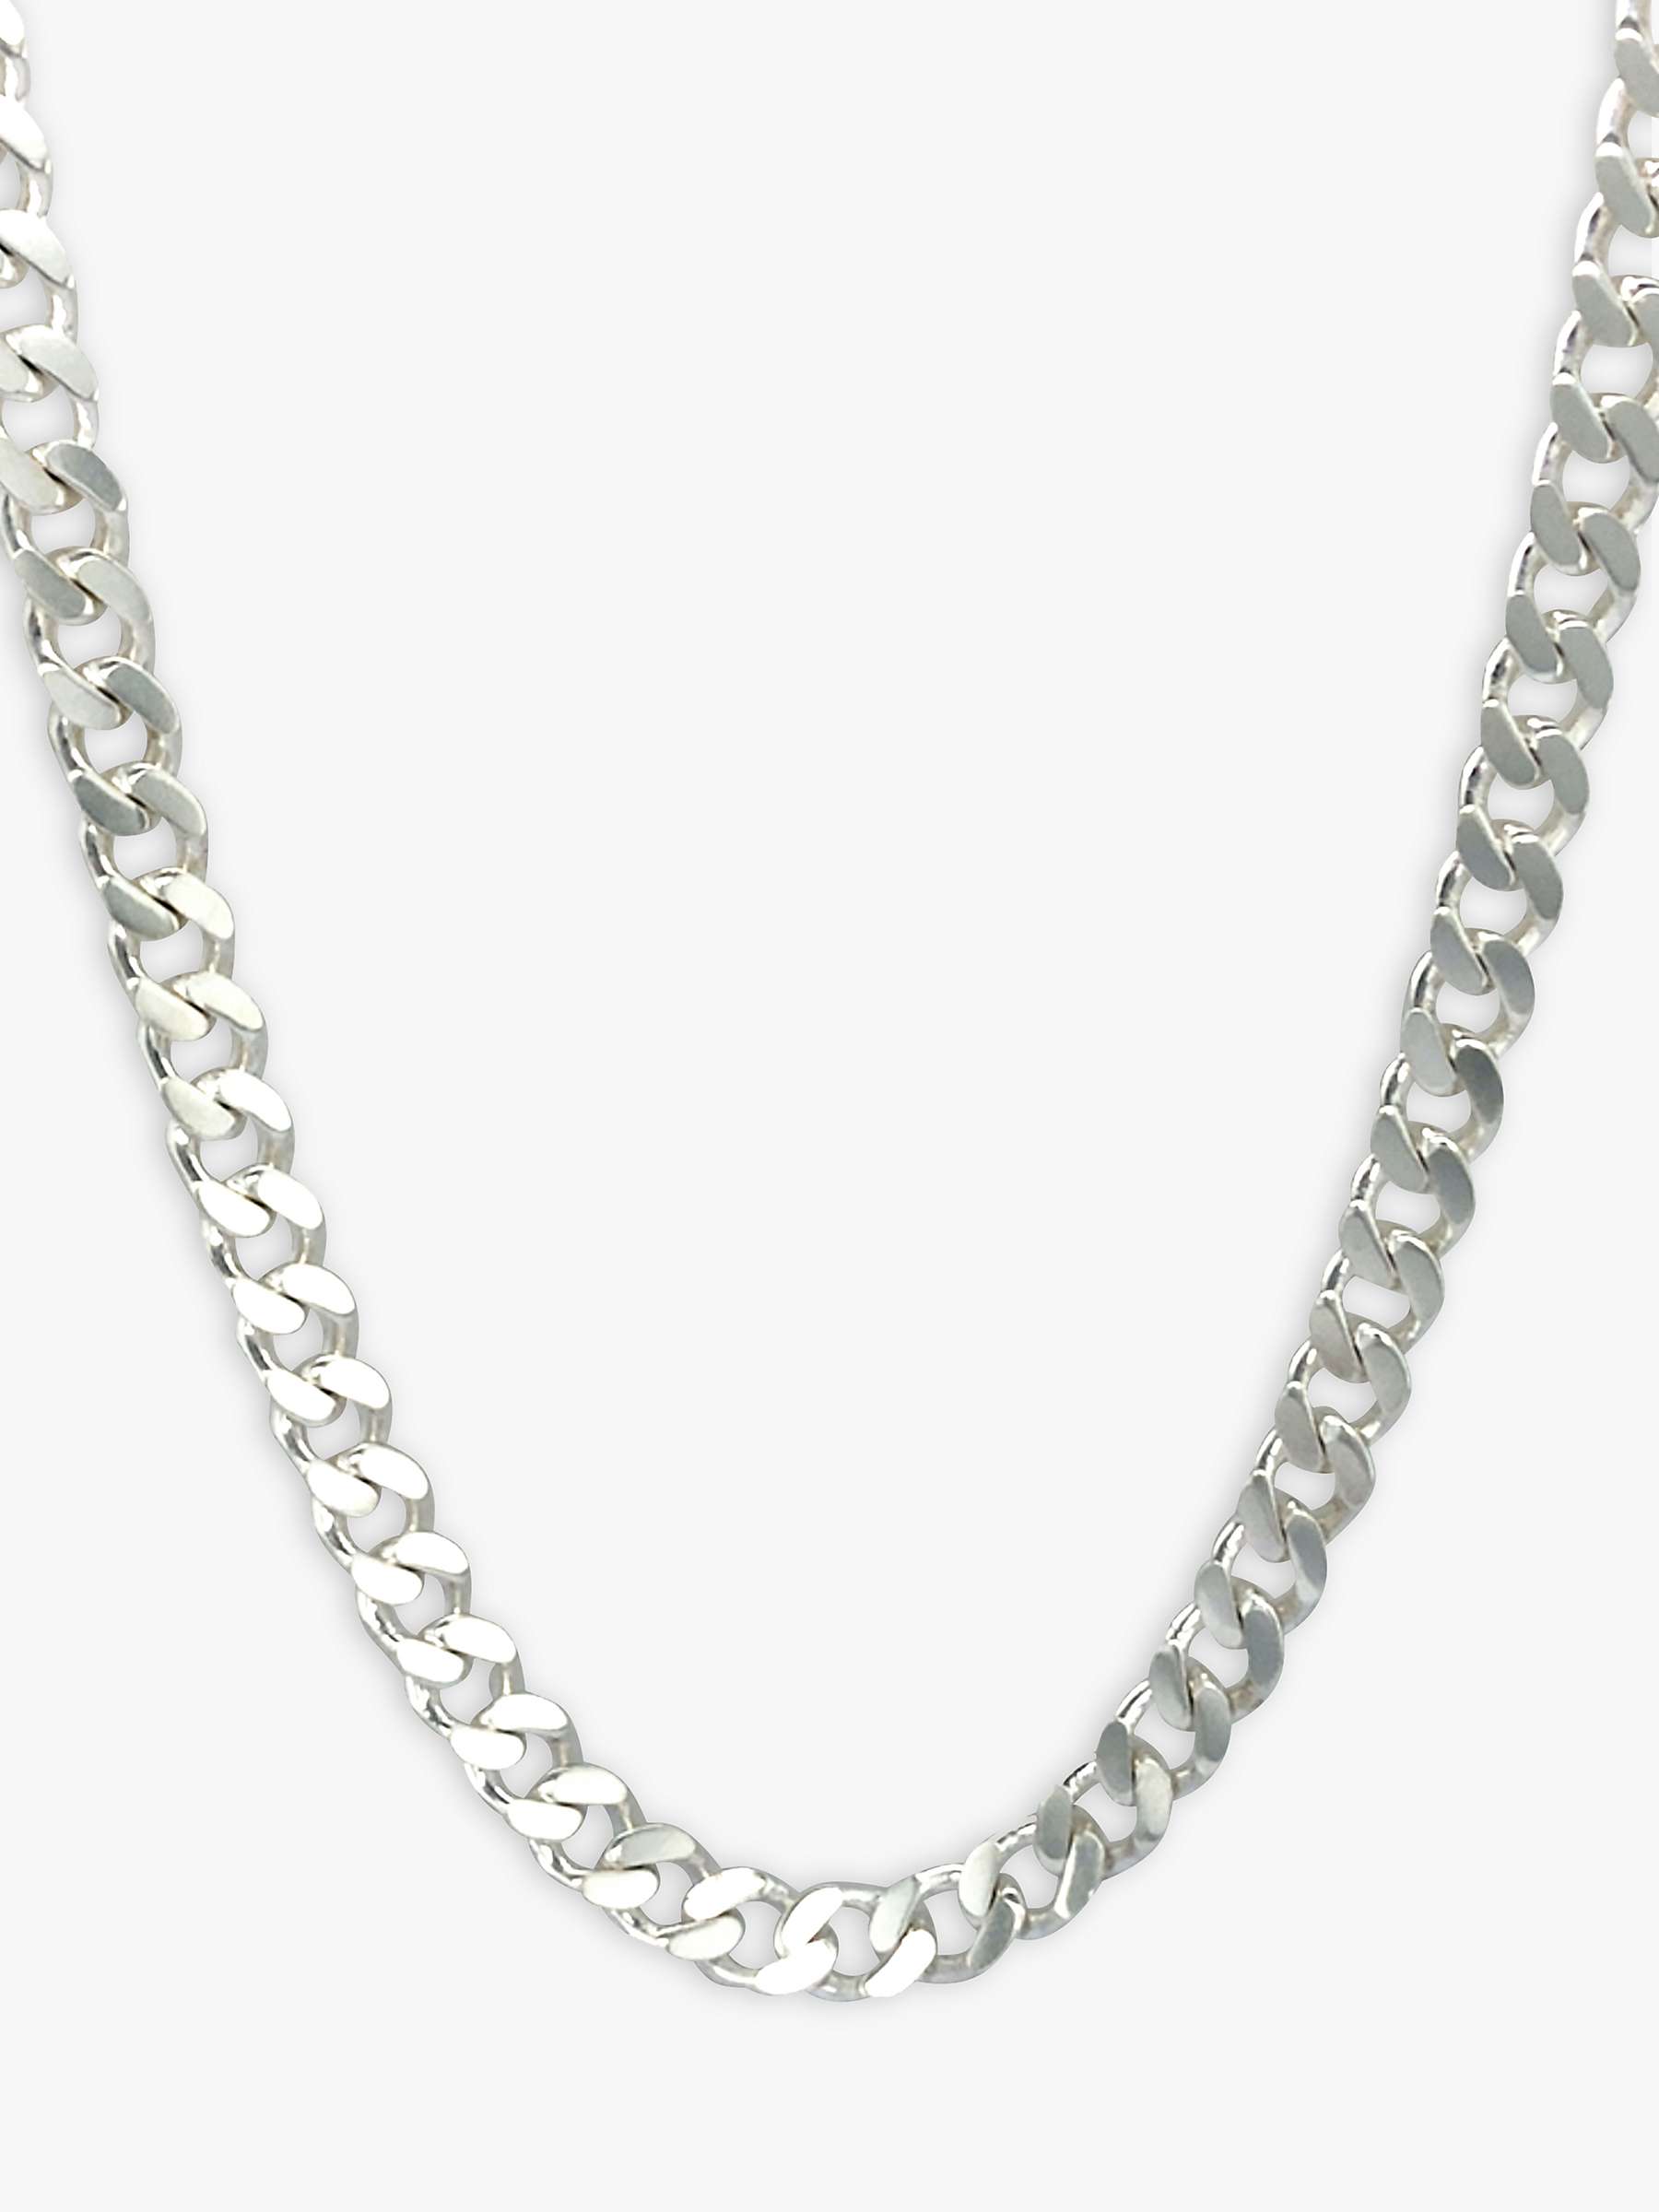 Buy Vintage Fine Jewellery Second Hand Flat Curb Link Chain Necklace, Dated Circa 1980s Online at johnlewis.com